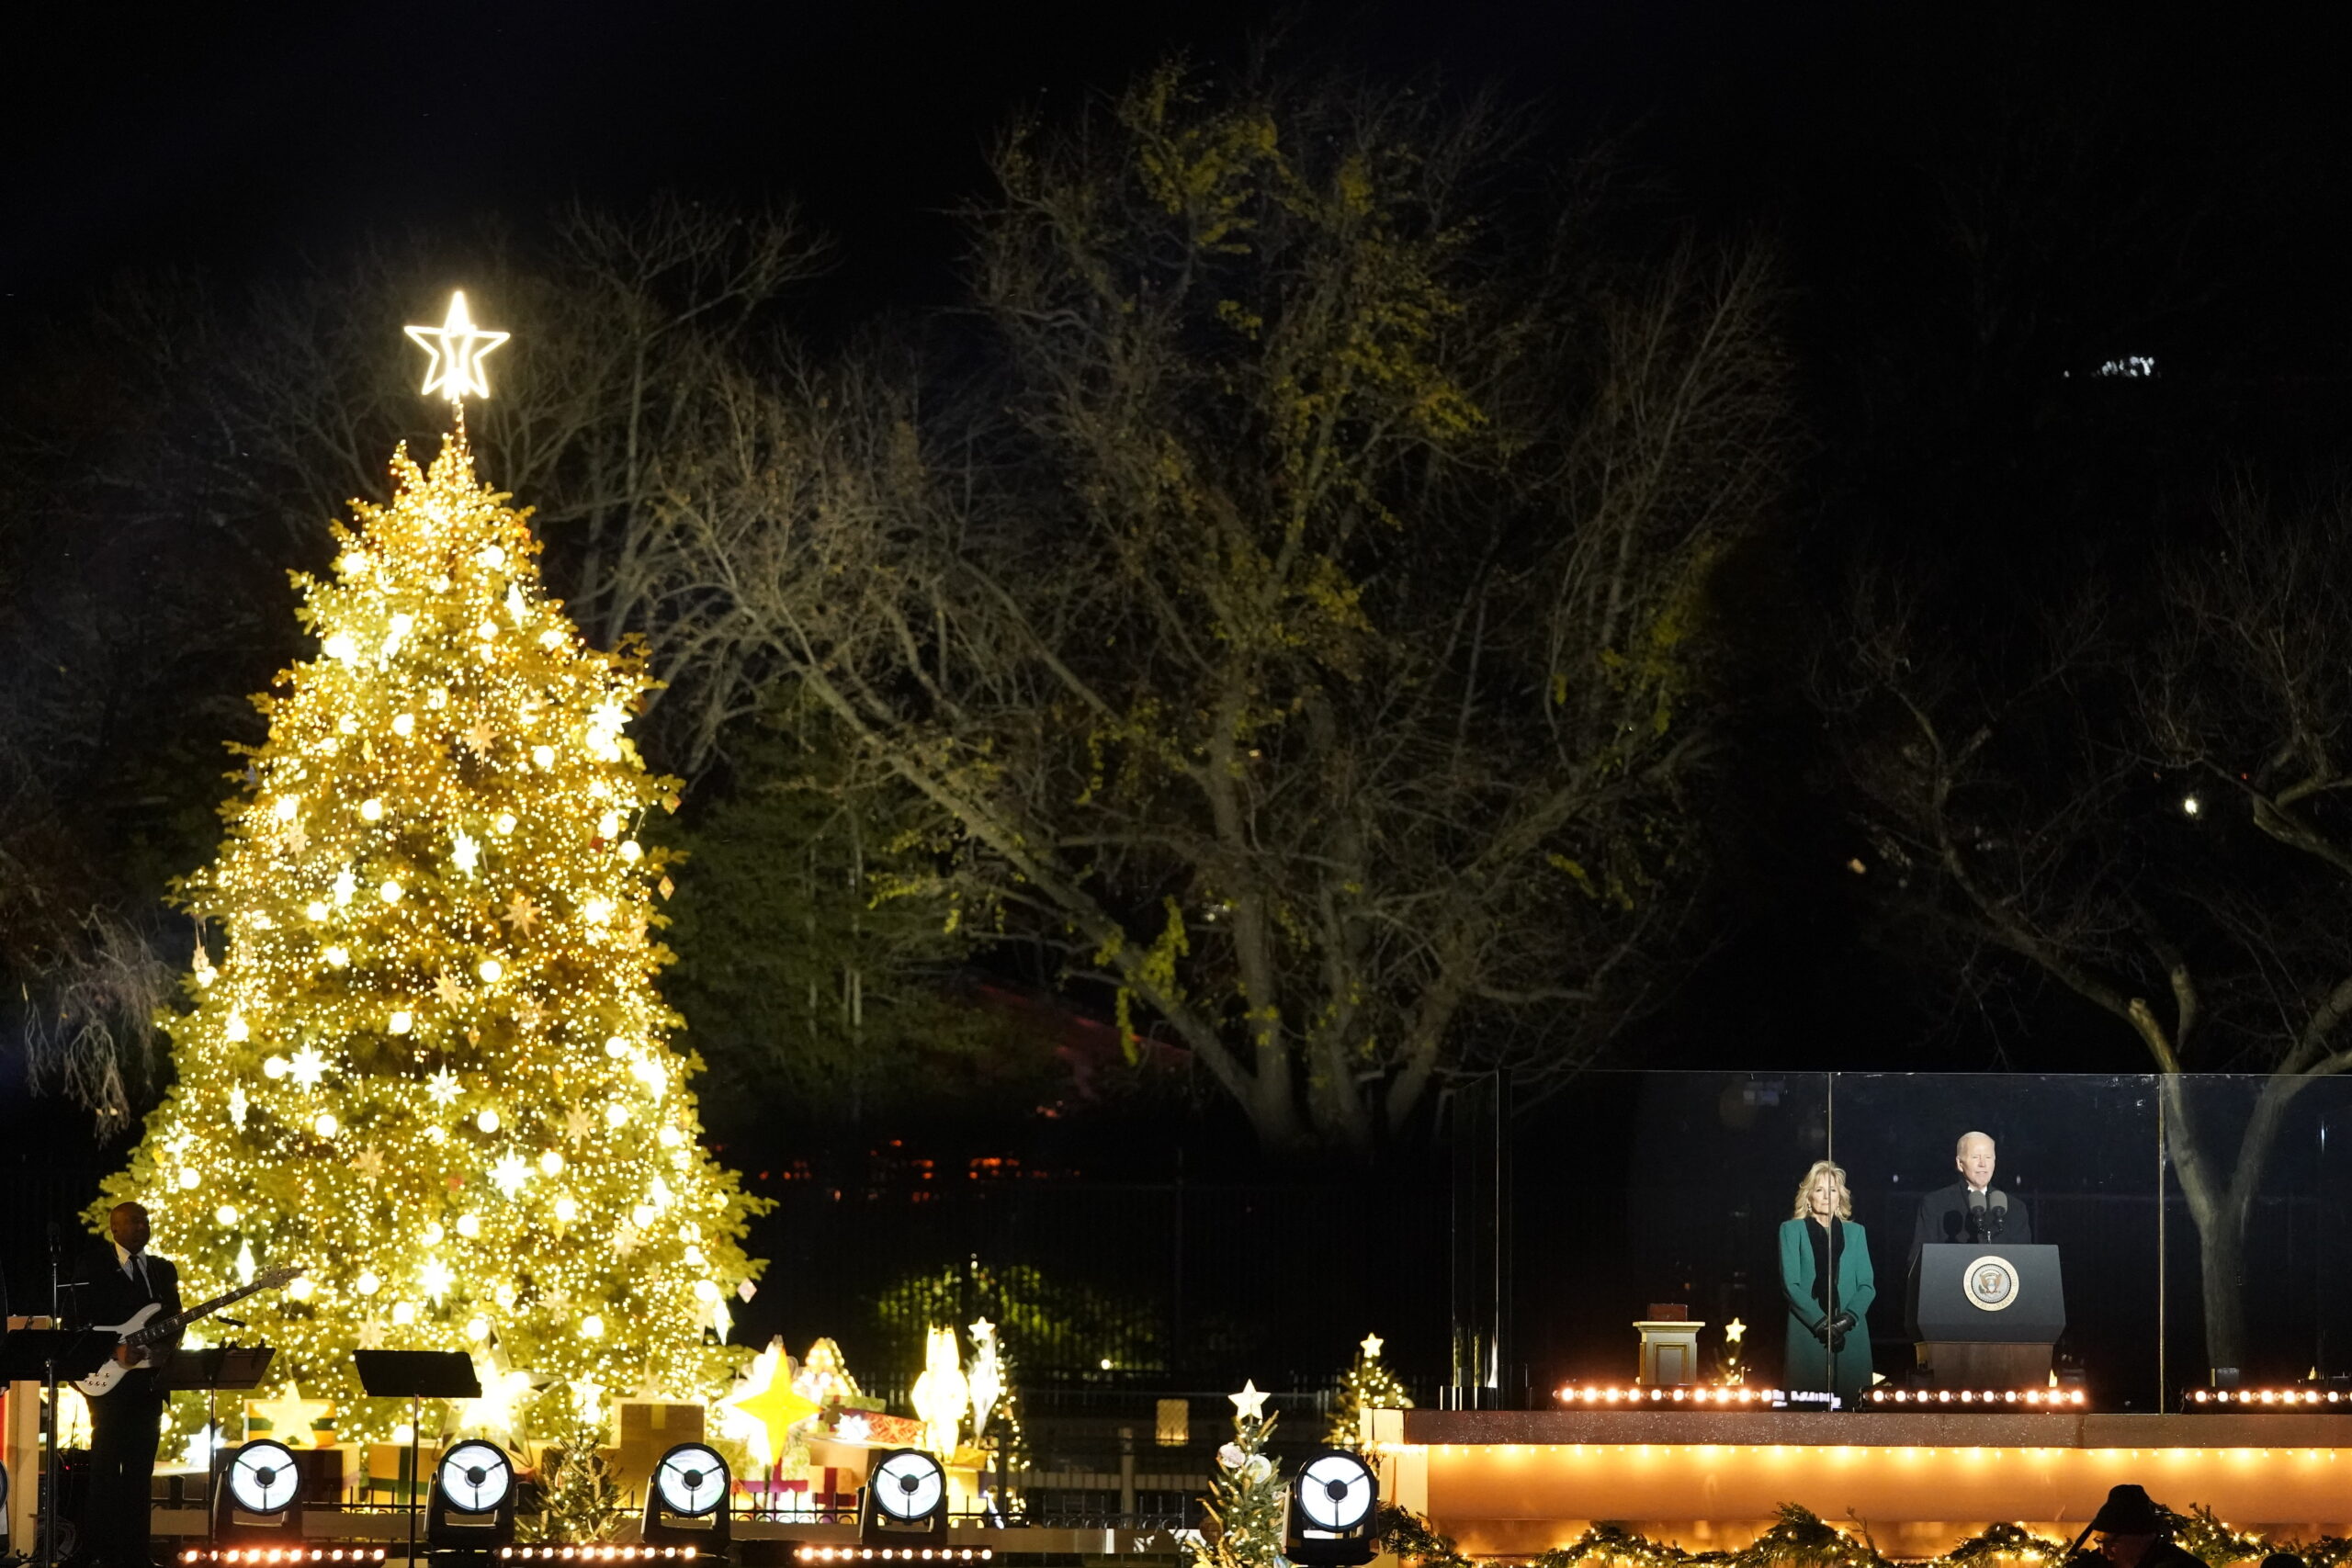 Here’s how to get tickets to this year’s National Christmas Tree